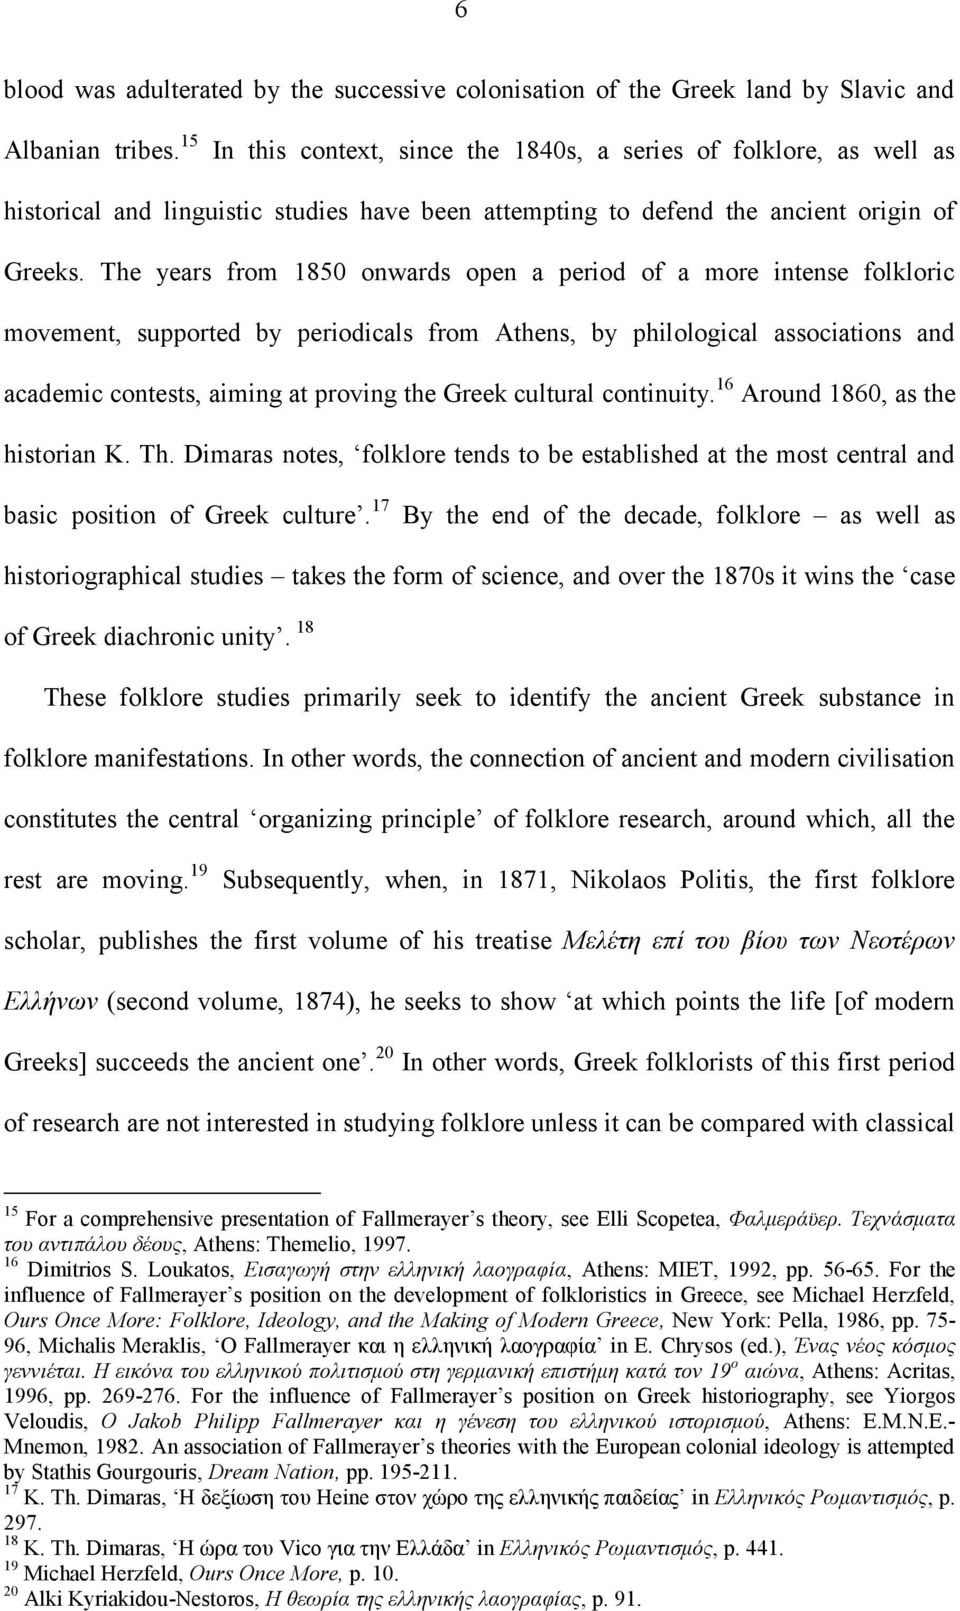 The years from 1850 onwards open a period of a more intense folkloric movement, supported by periodicals from Athens, by philological associations and academic contests, aiming at proving the Greek